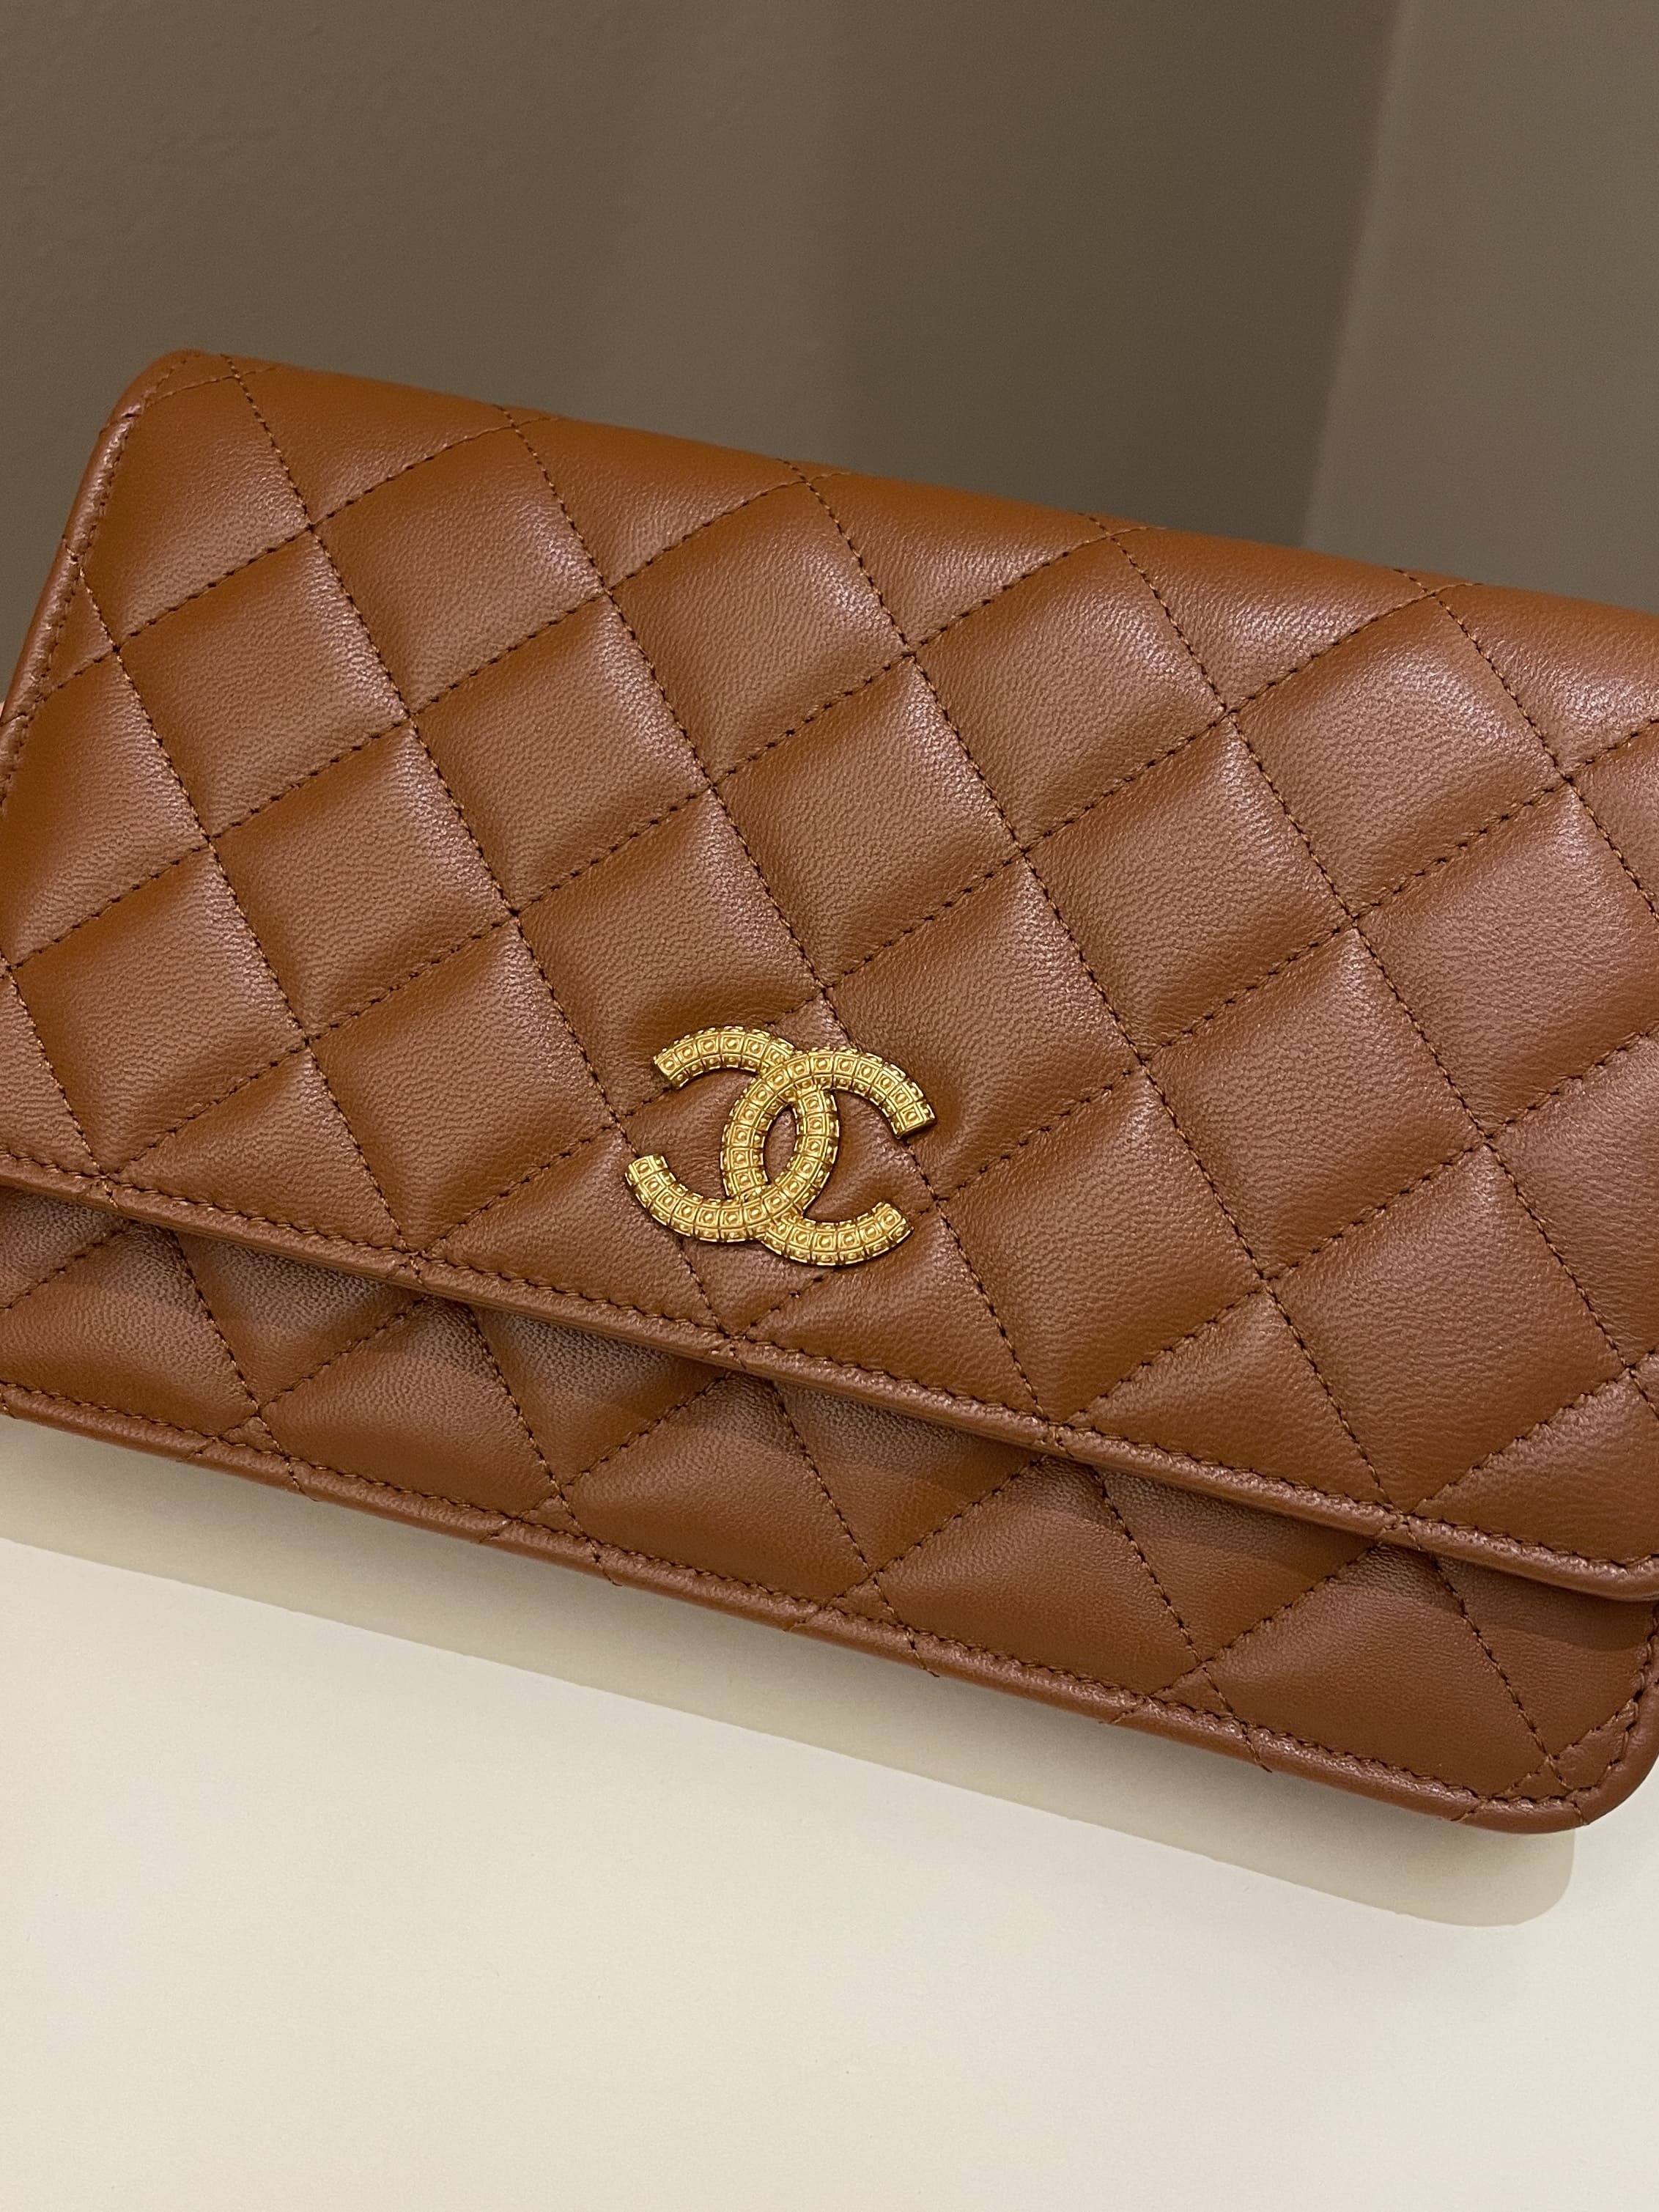 Chanel 23A Cc Quilted Wallet on Chain Tan Brown Stiff Lambskin